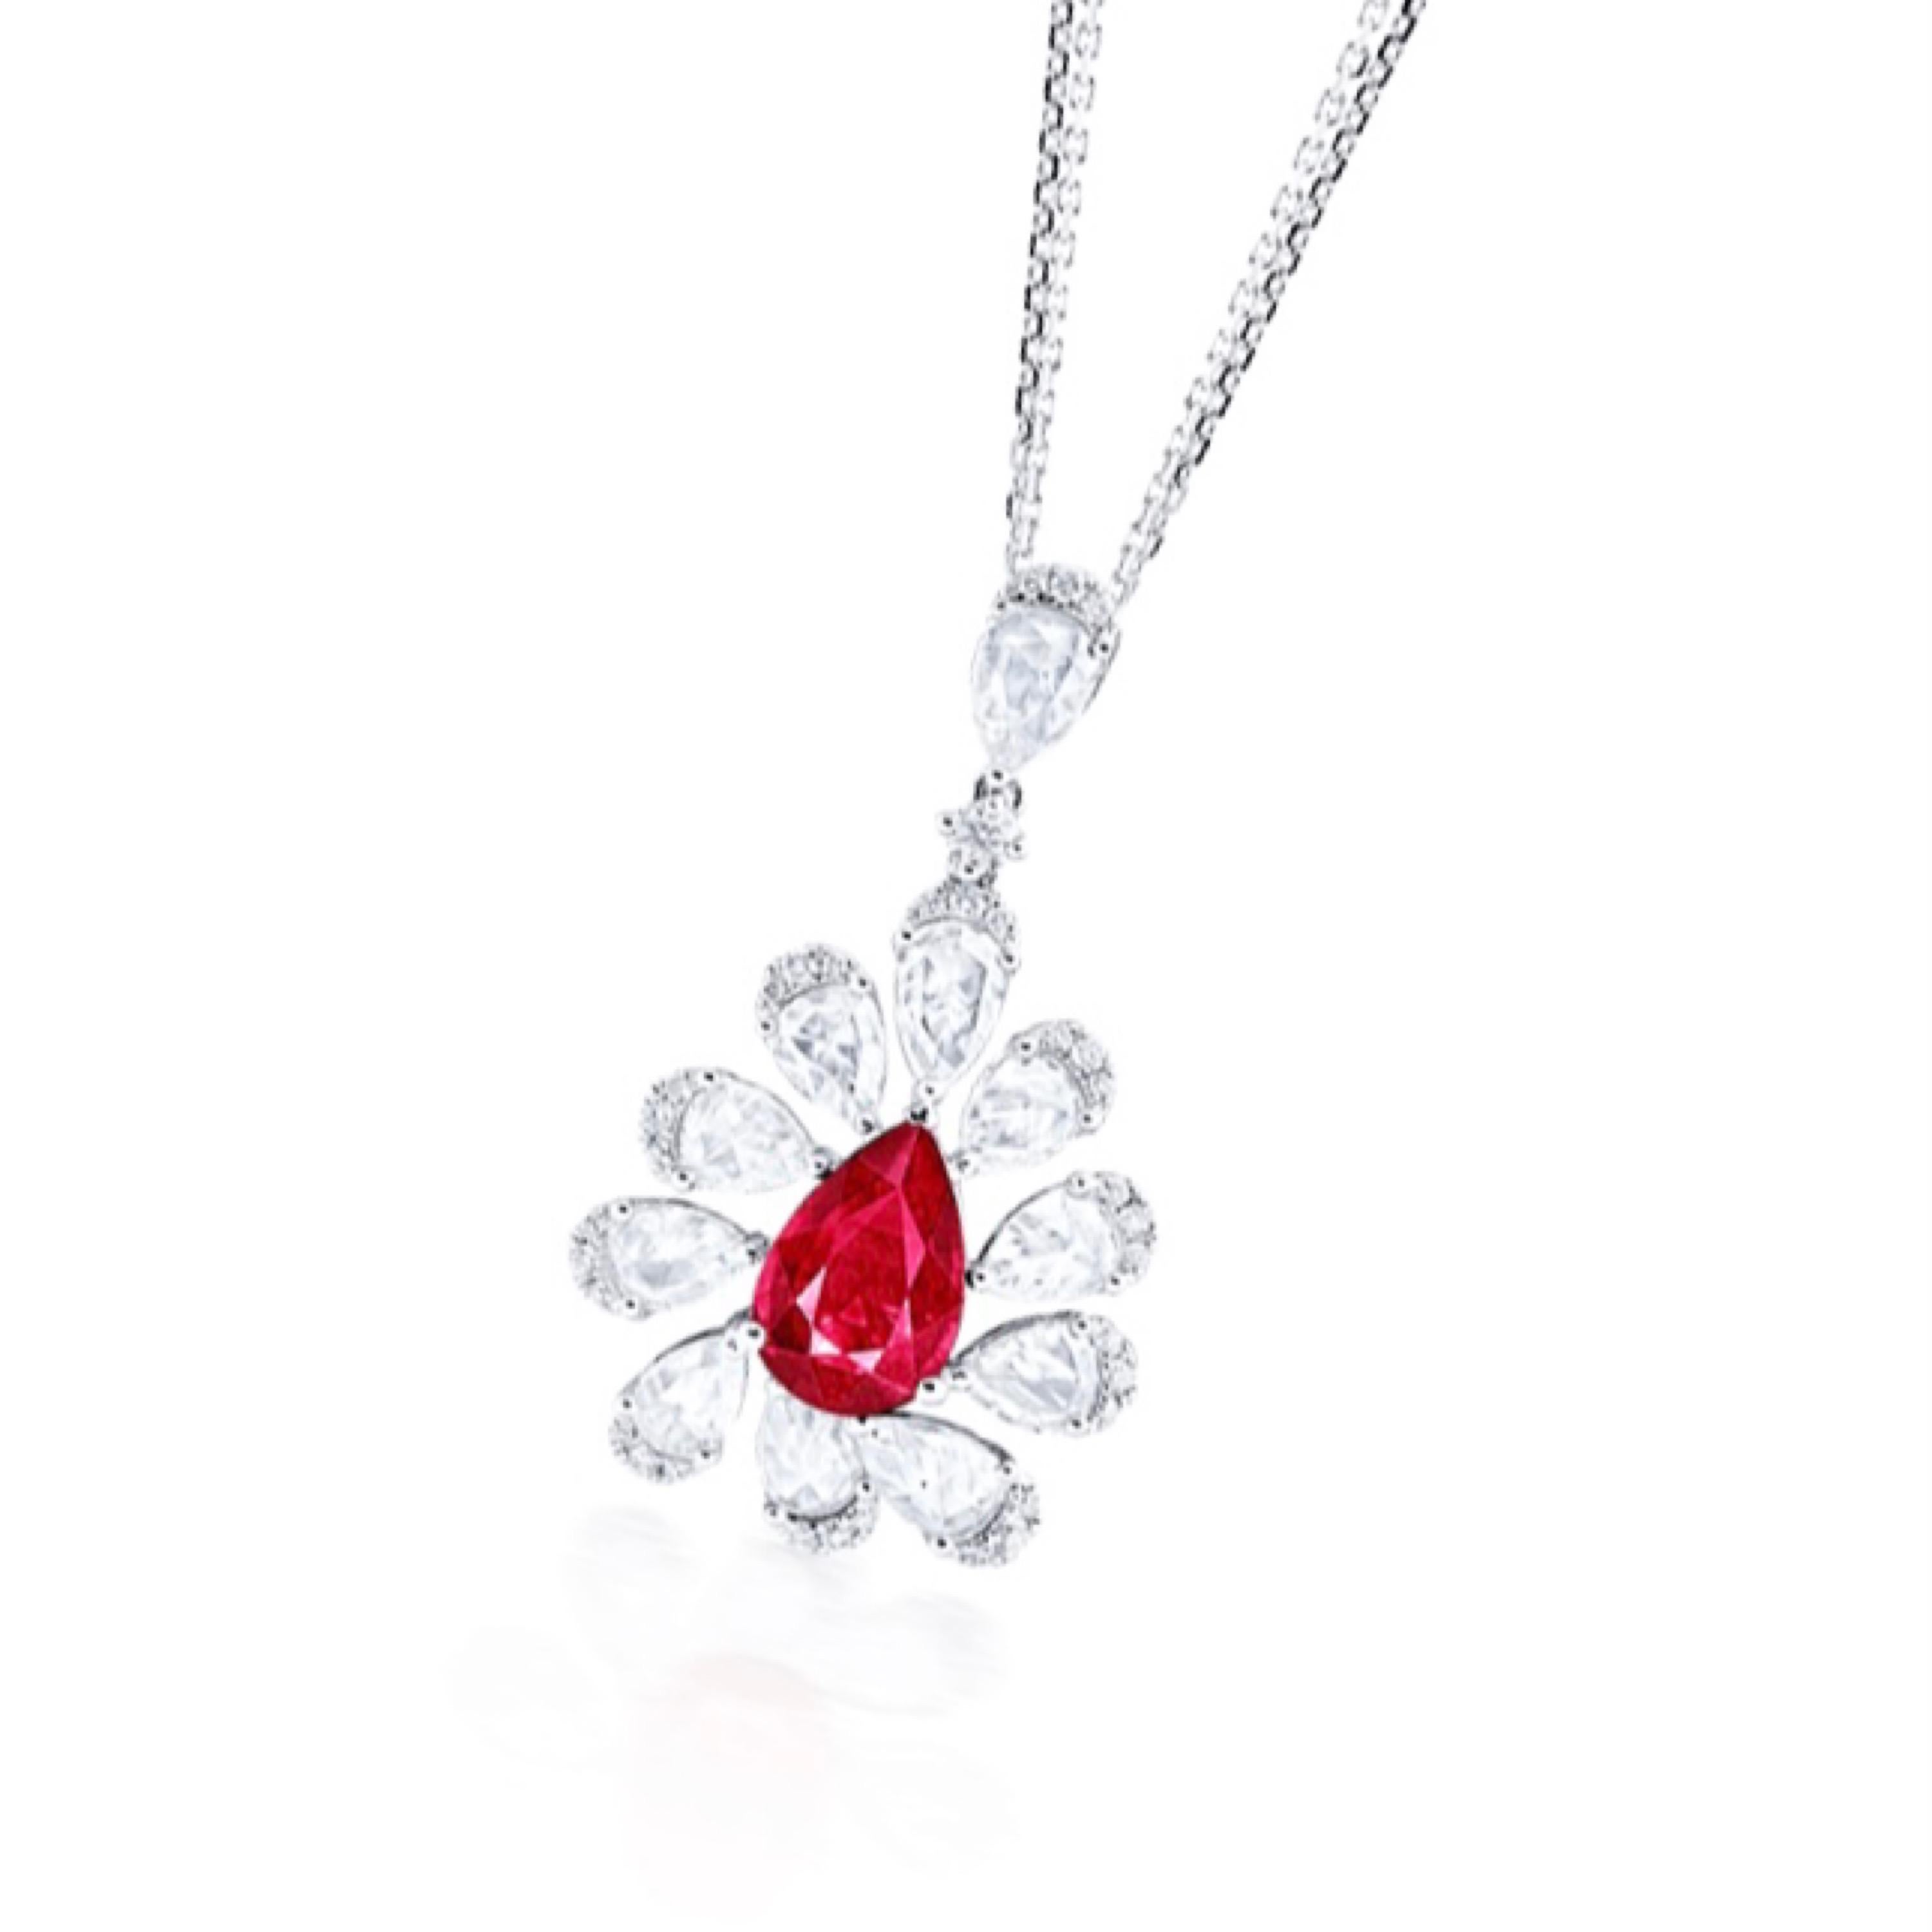 From the Emilio Jewelry Vault in New York City,

Main stone: 2.00 carats Vivid to Deep Red PEAR
Setting: 11 rose-cut white diamonds totaling approximately 1.45 carats, 38 white diamonds totaling approximately 0.38 carats, 18K
The natural, untreated,